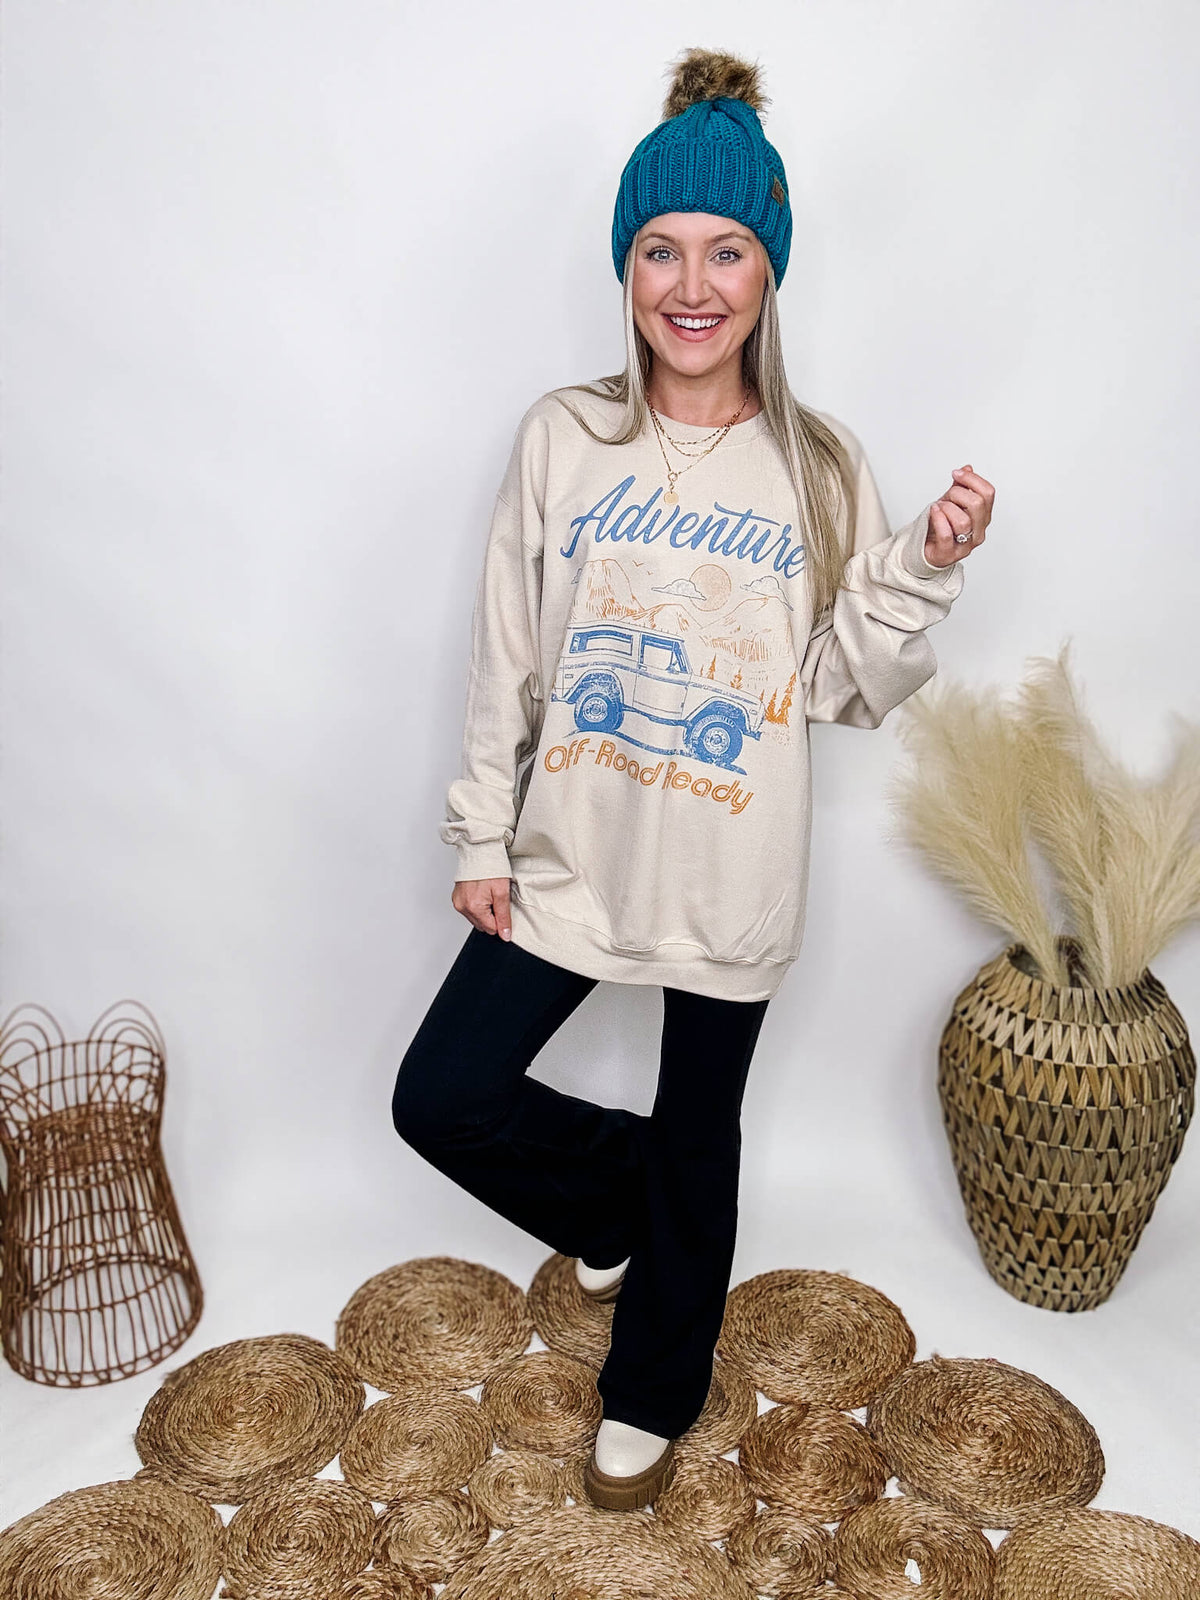 Golden Rose Co Sand Beige, Blue and Camel Adventure Off-Road Ready Oversized Graphic Sweatshirt Fuzzy Inside Loose Oversized Fit 80% Ring-Spun Cotton, 20% Polyester